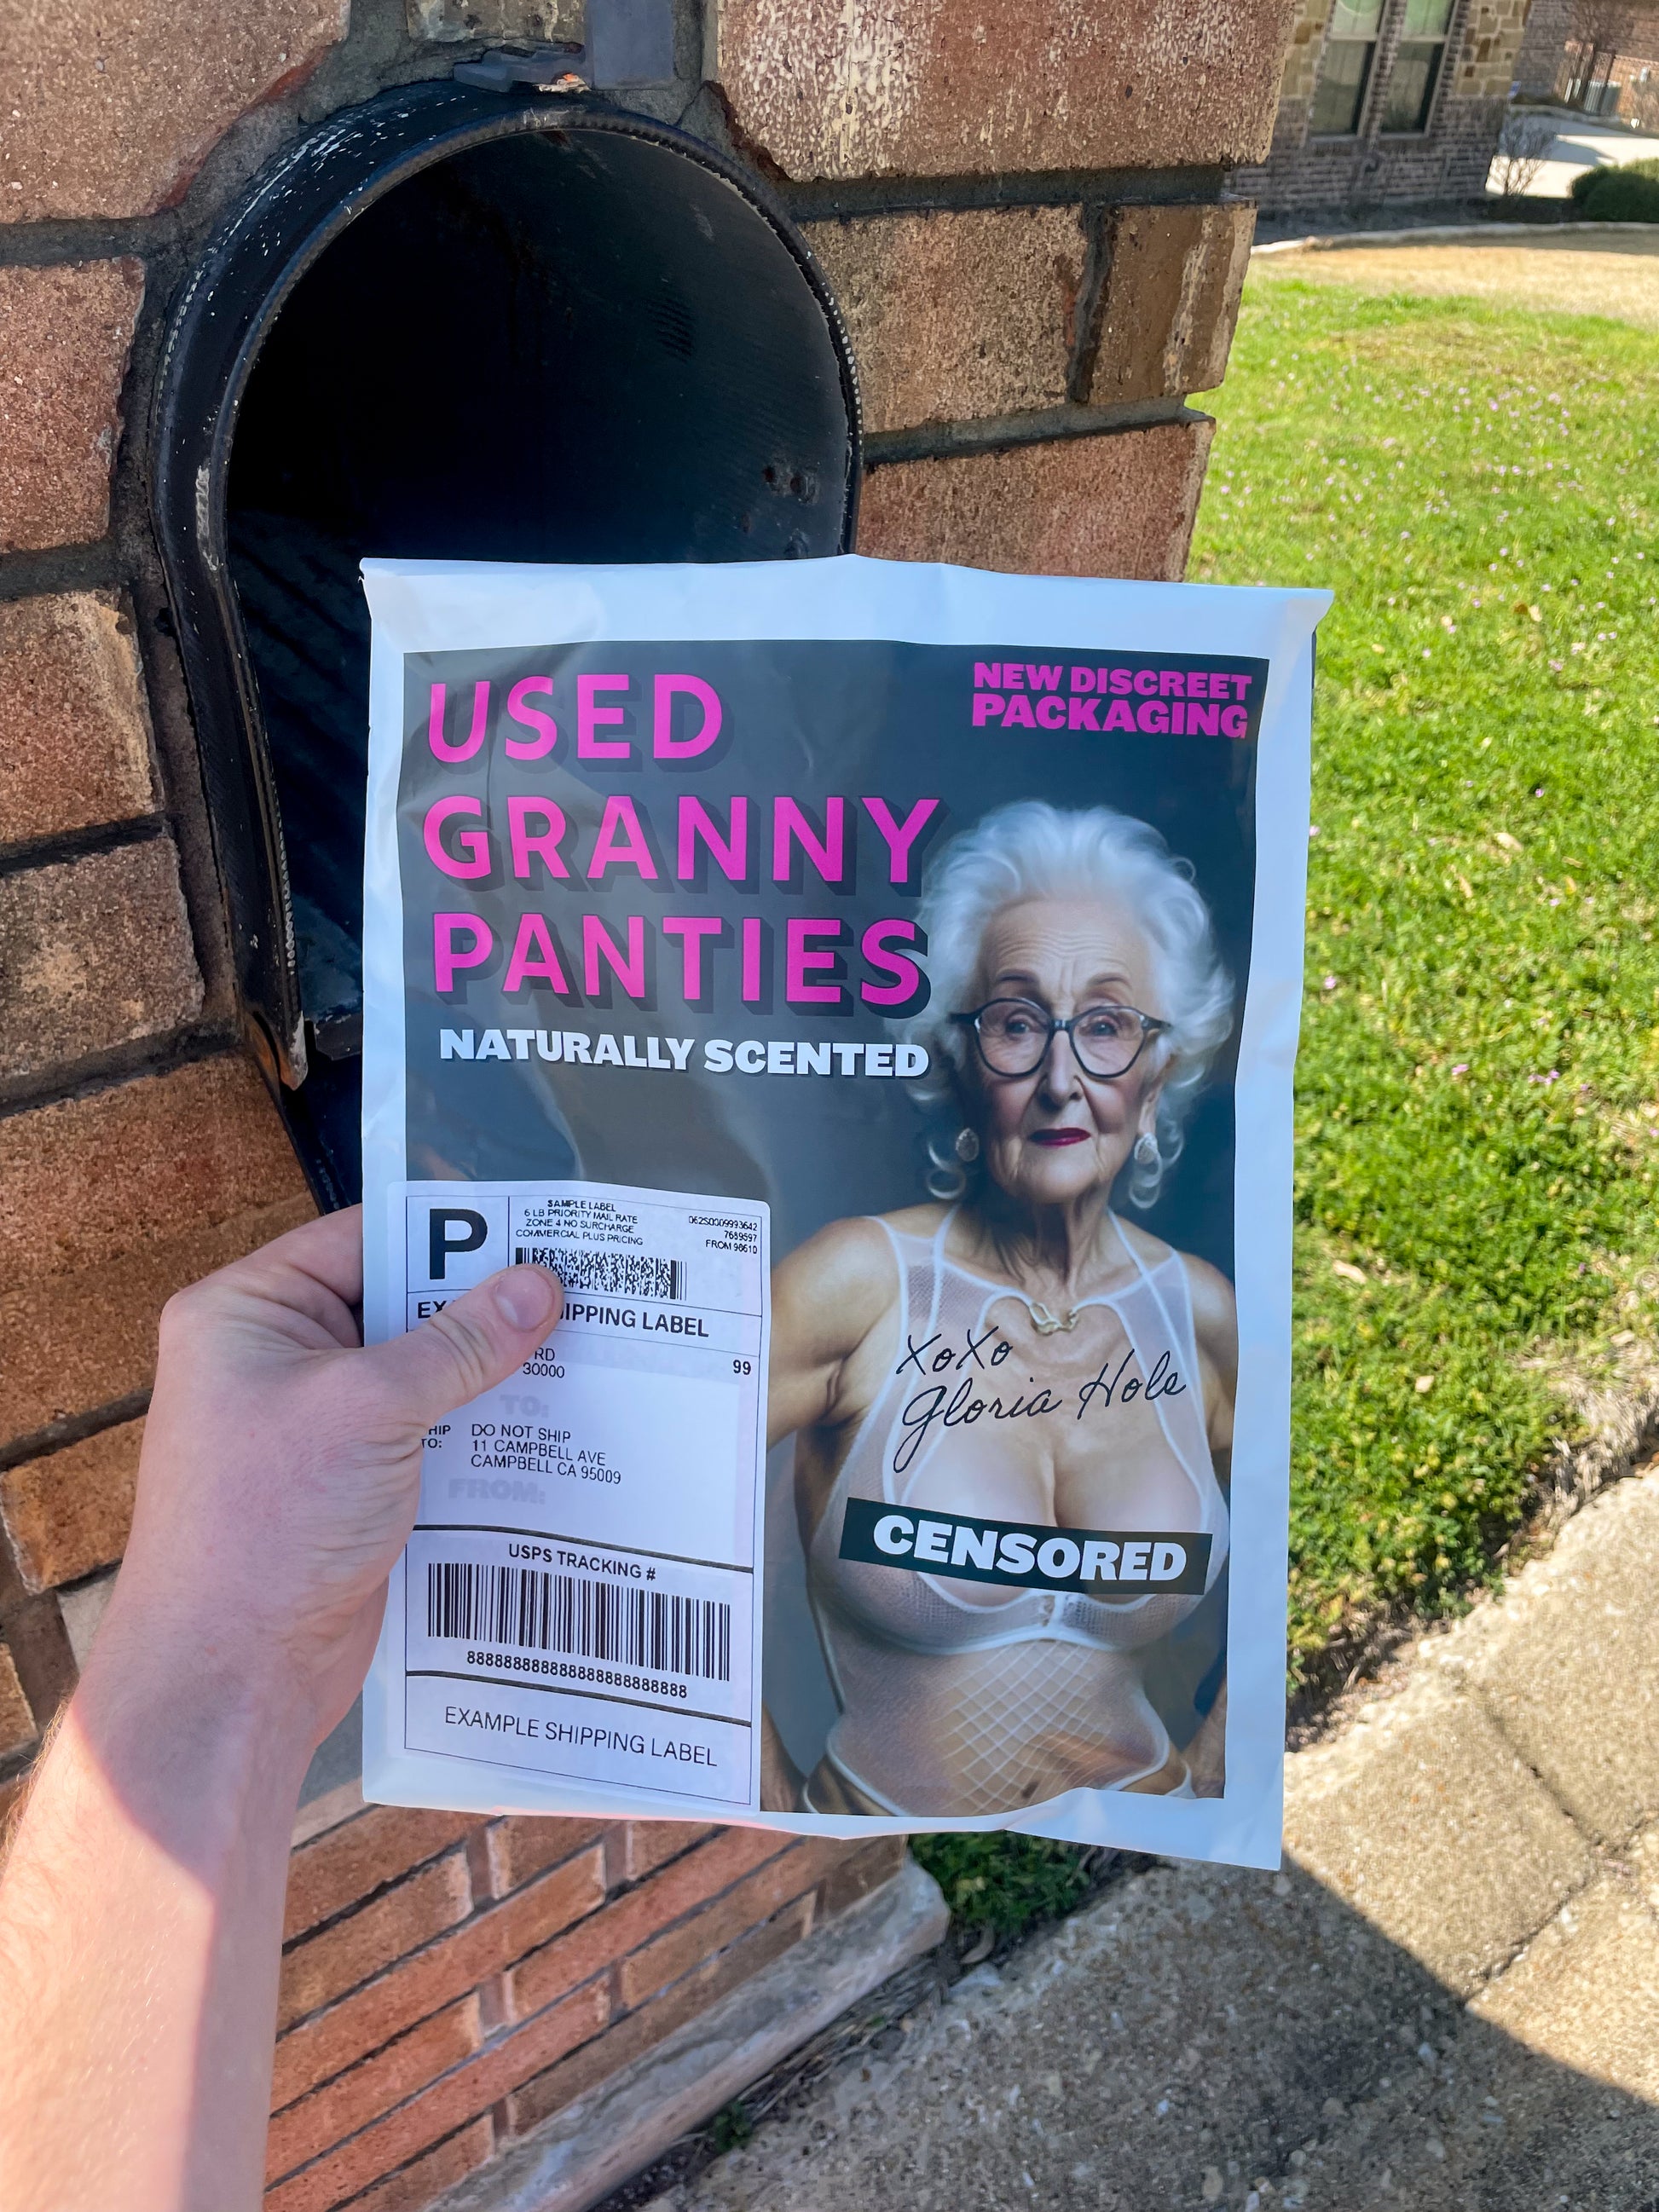 POV of someone's unsuspecting prank target discovering an anonymous prank package in their mailbox. It shows a sexy grandma in lingerie and says "USED GRANNY PANTIES".